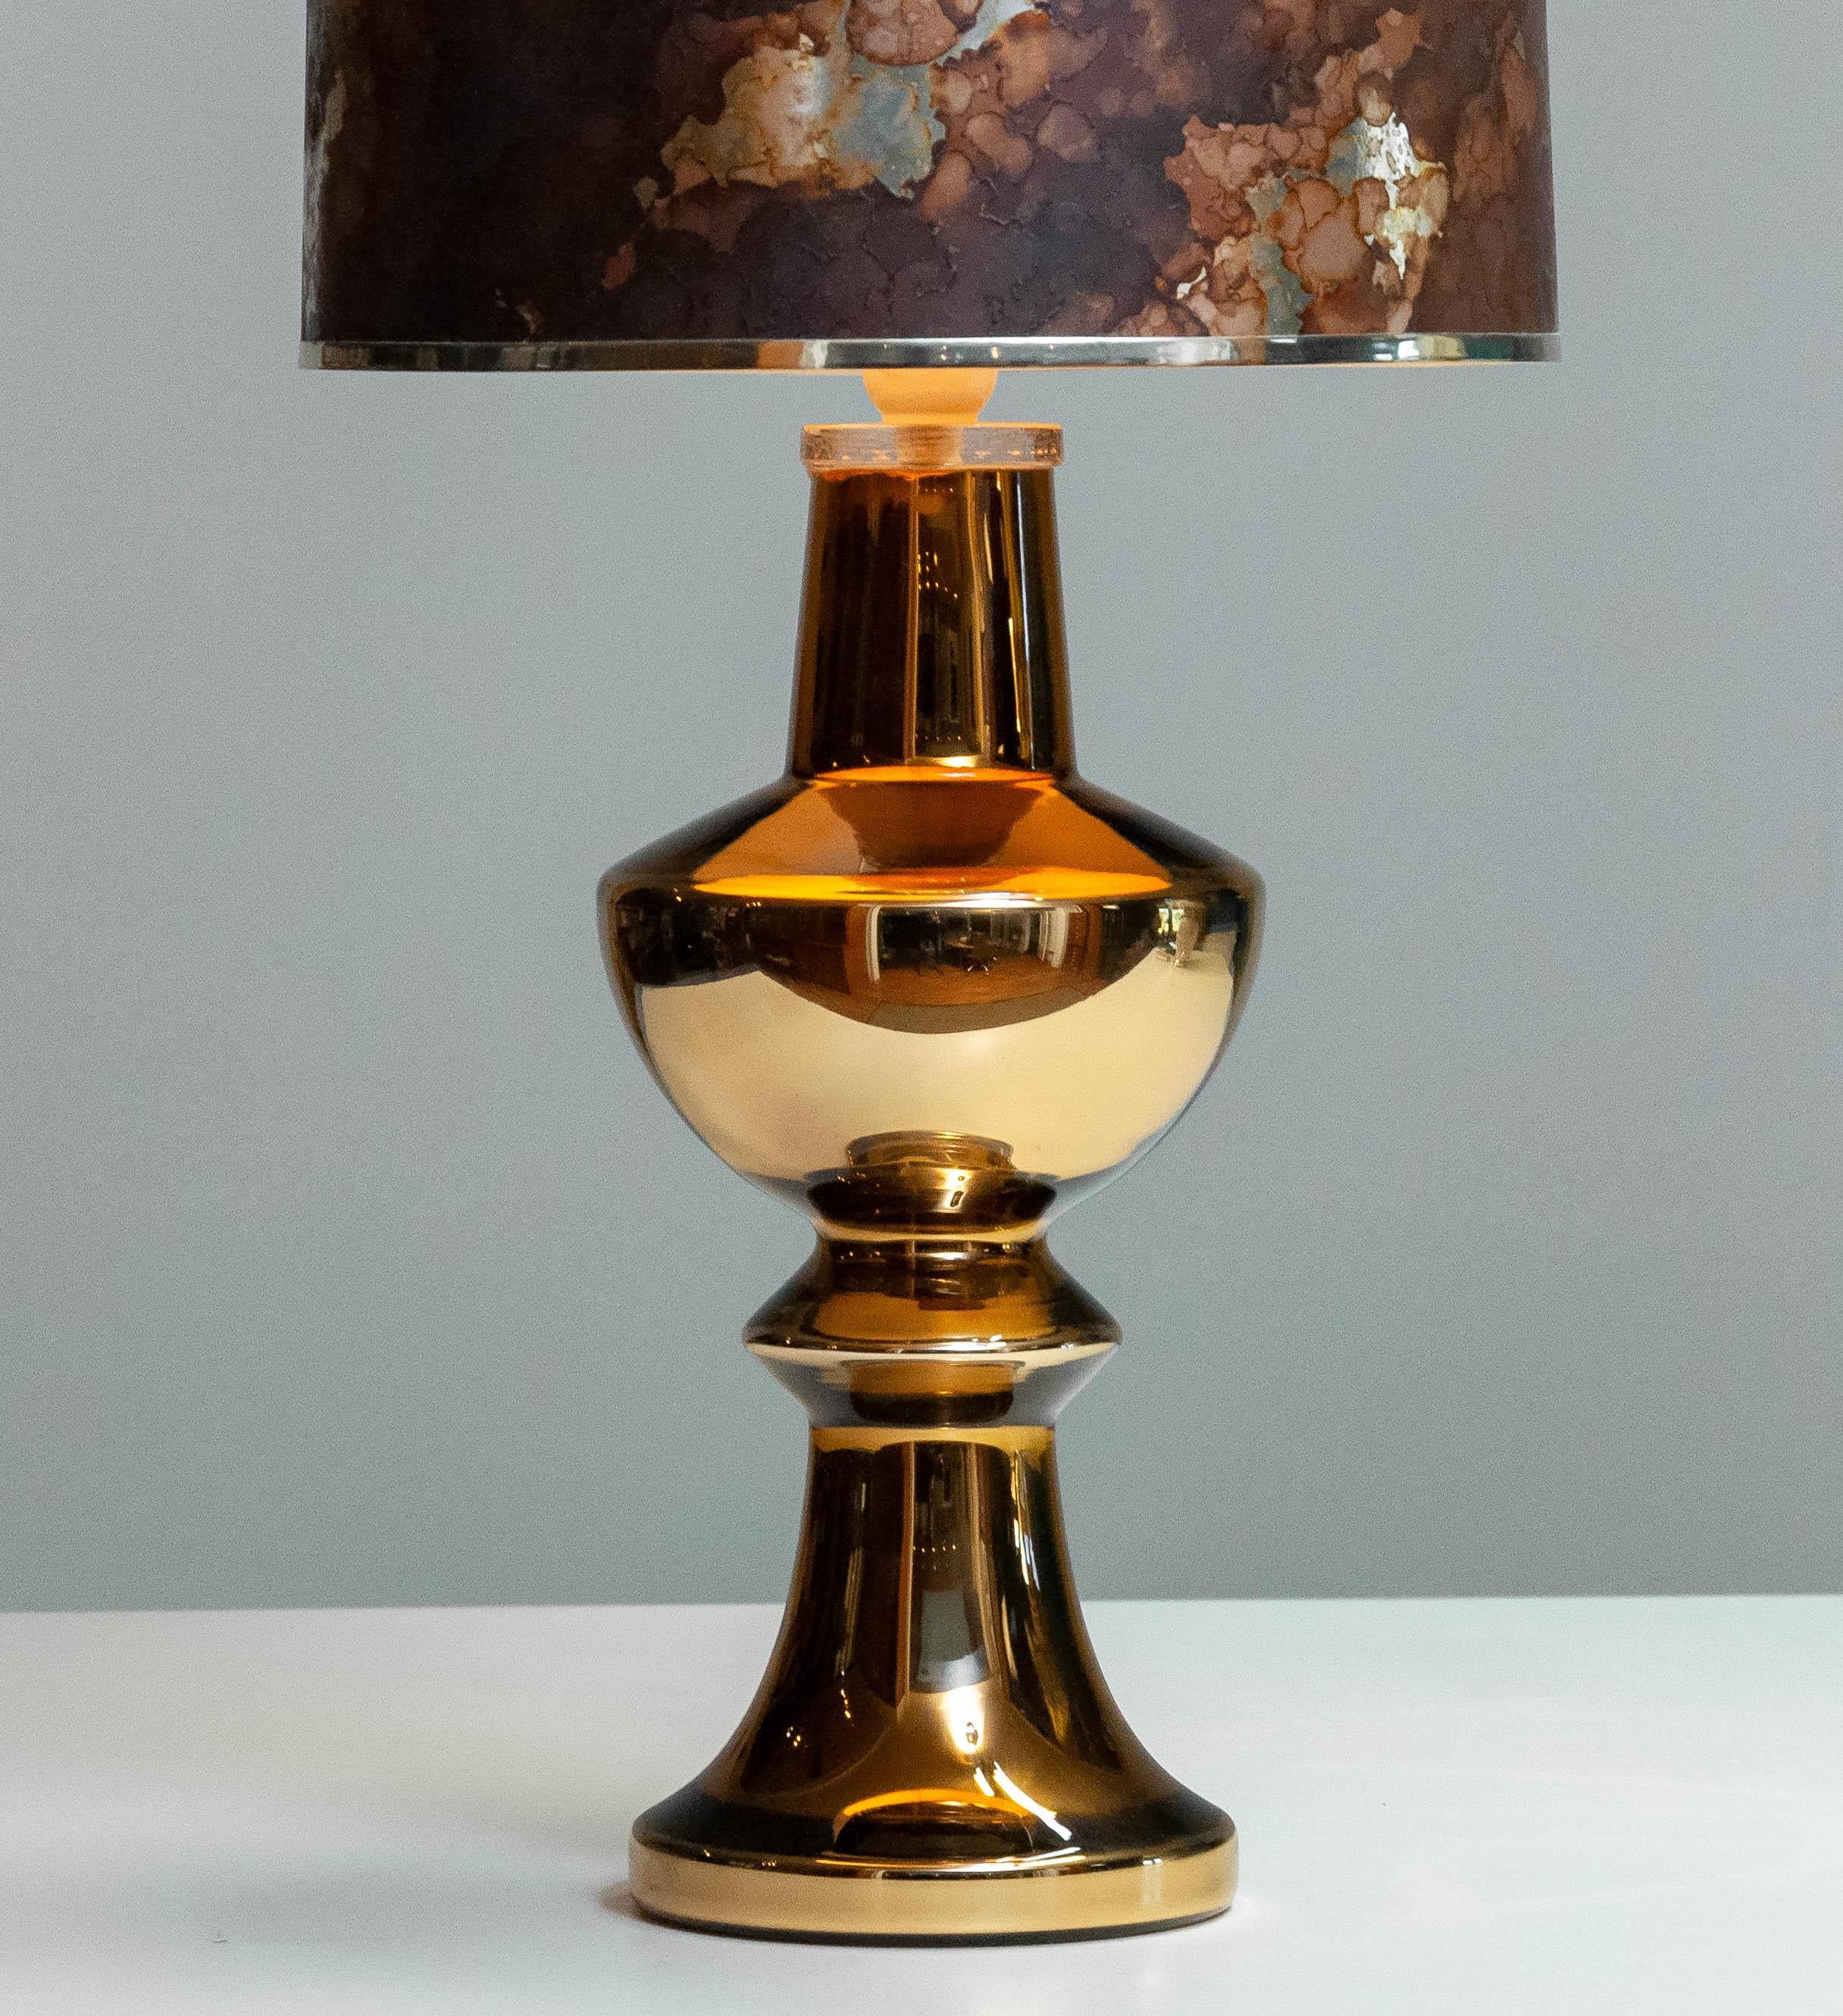 Beautiful golden art glass 'Brutalist' table lamp designed by Gustav Leek for Luxux Vitssjö Sweden from the 1960's with original brutalist shade.
This table lamp is overall in very good condition and can be used in an area with 110 and 230